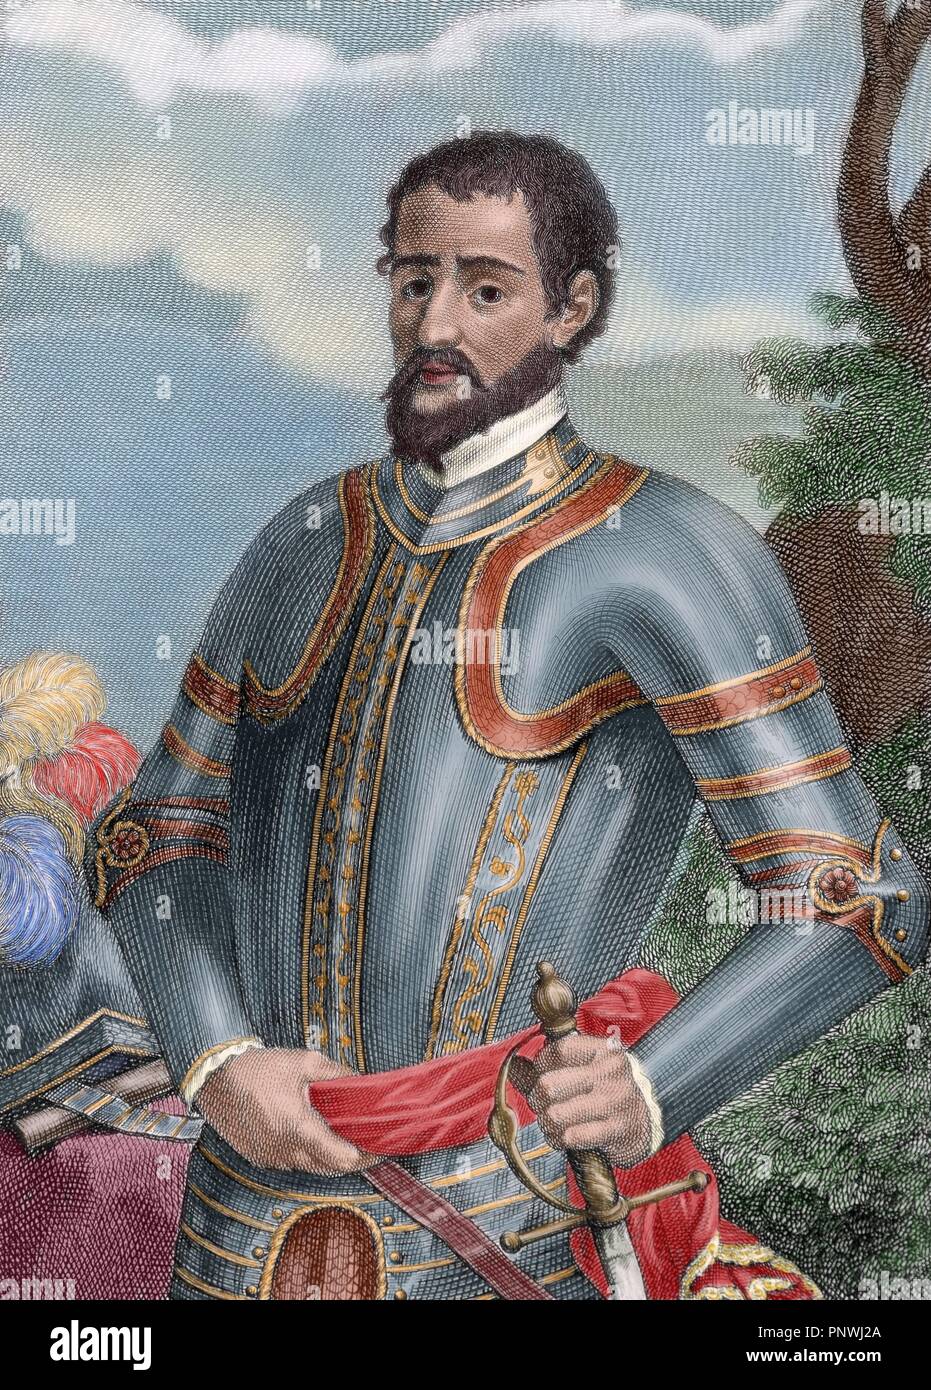 Hernando de Soto (c.1496/1497Ð1542). Spanish explorer and conquistador. Was the first European documented to have crossed the Mississippi River. Colored engraving. Stock Photo